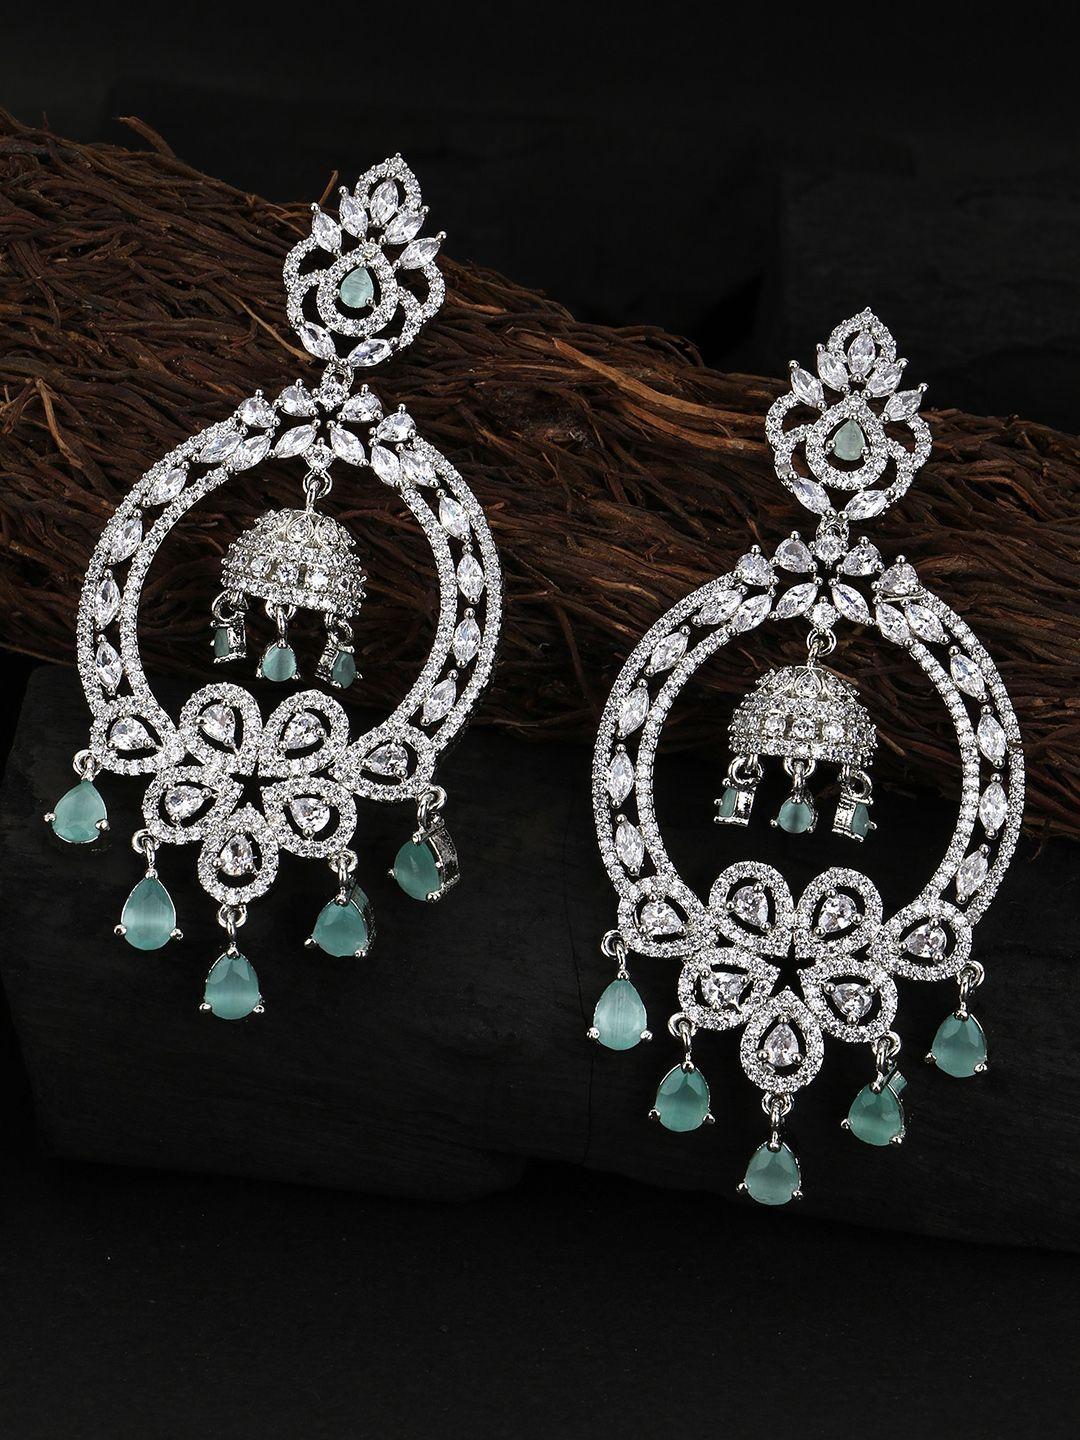 adwitiya collection rhodium-plated cz-studded crescent shaped drop earrings